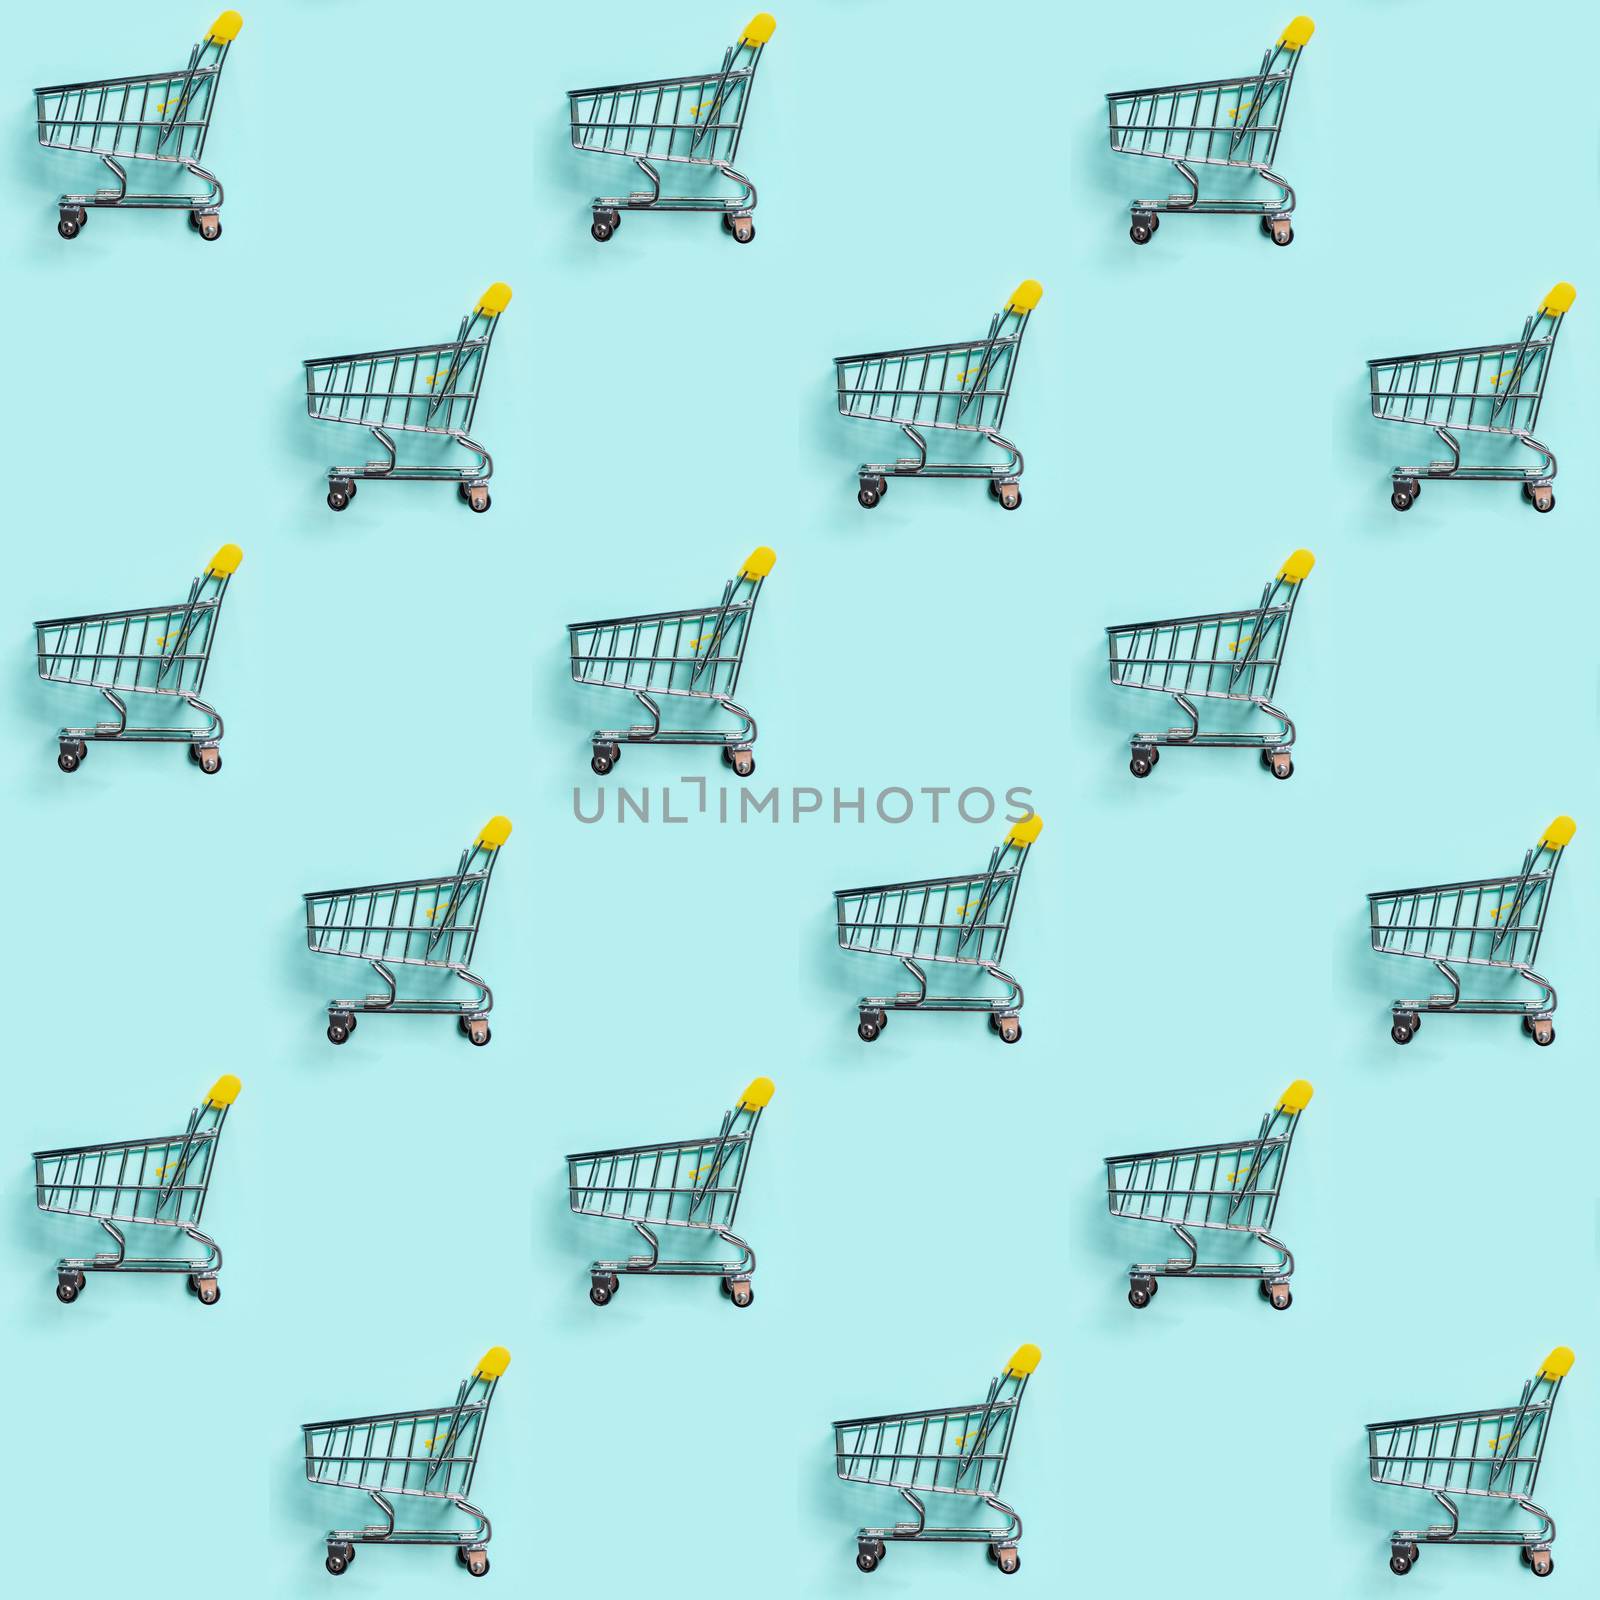 Shopping cart staggered on blue. Seamless pattern by fascinadora